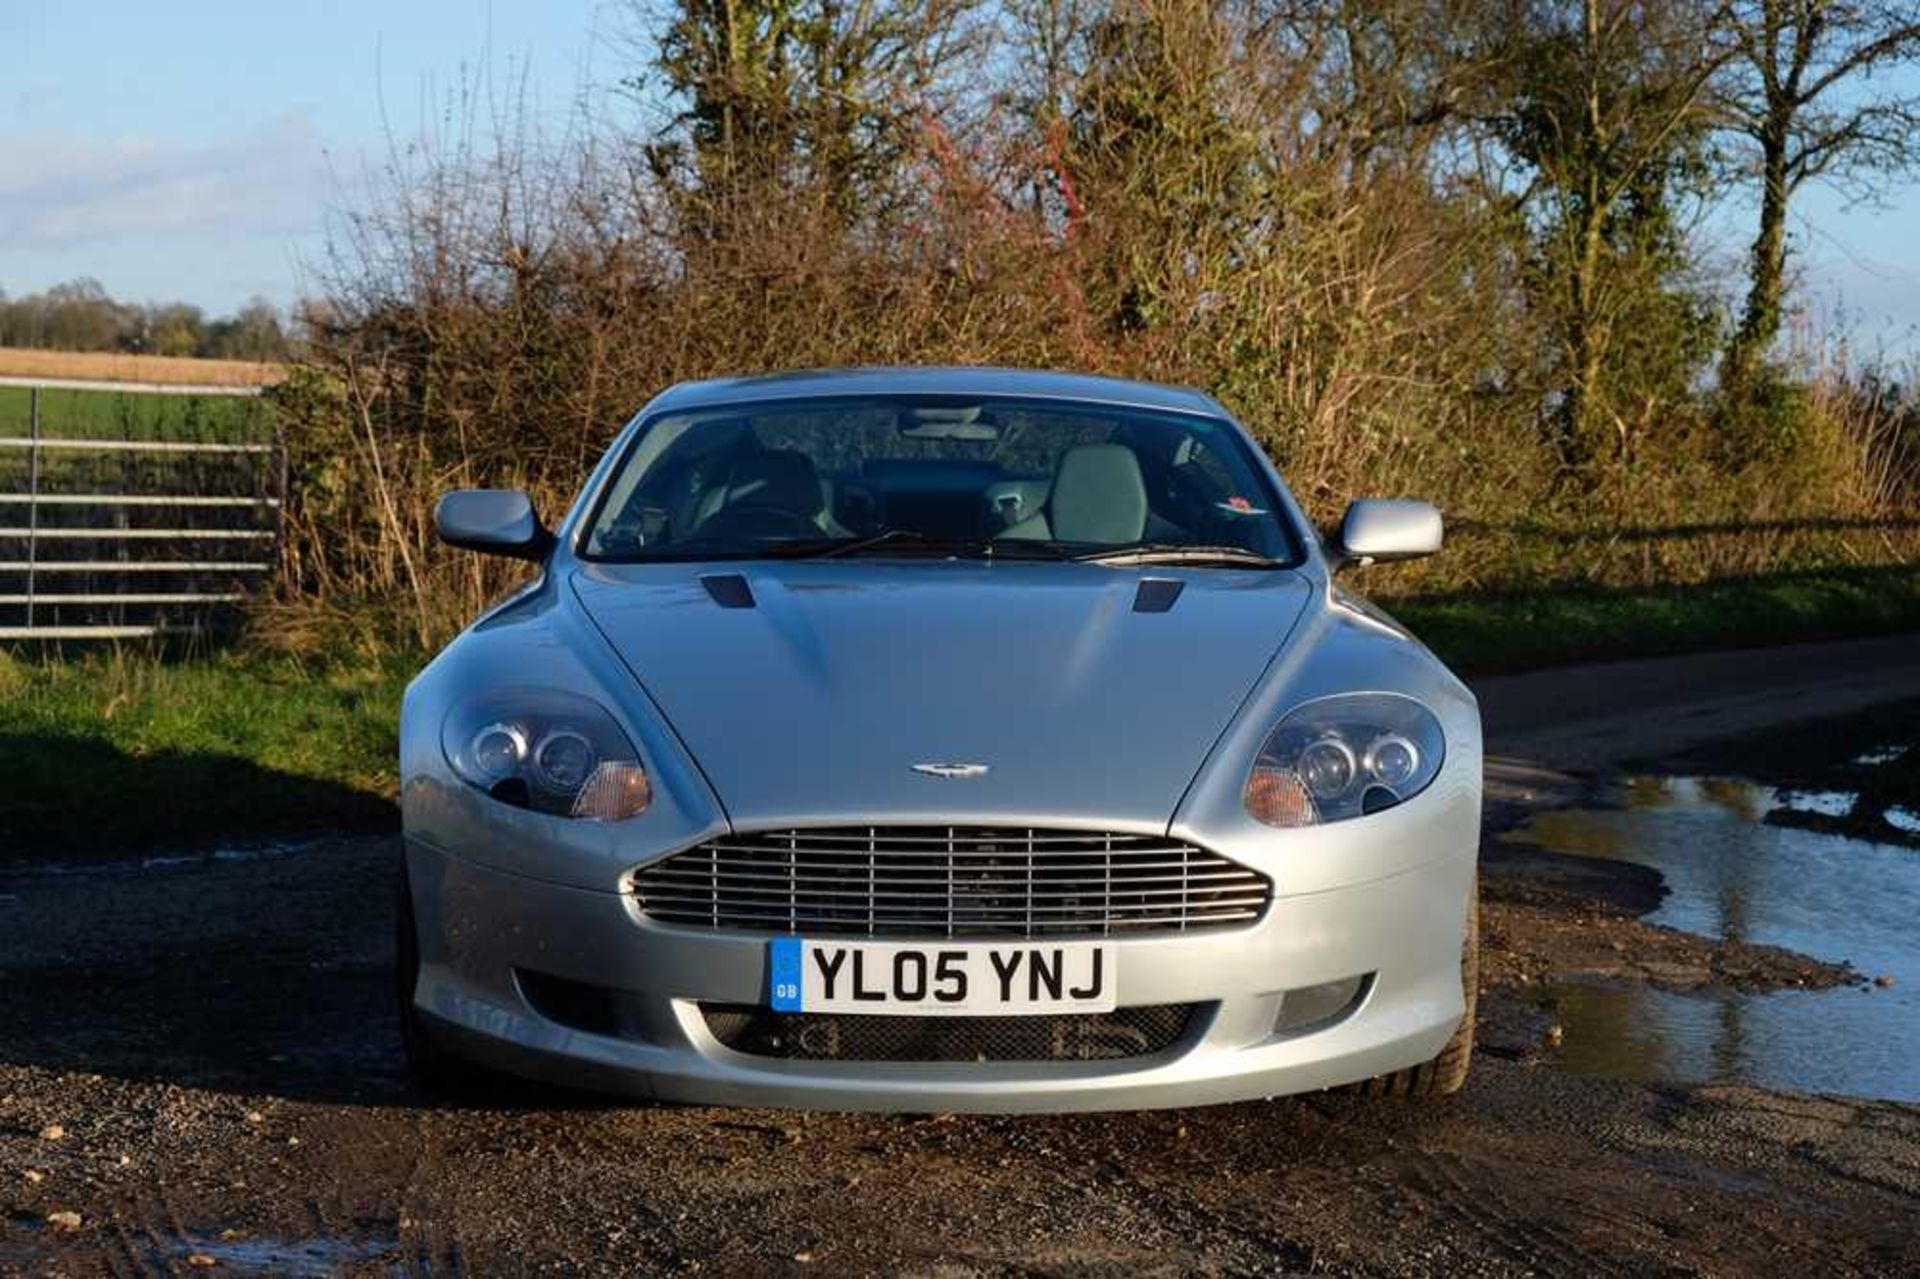 2005 Aston Martin DB9 c.25,000 from new and 4 former keepers - Image 10 of 59